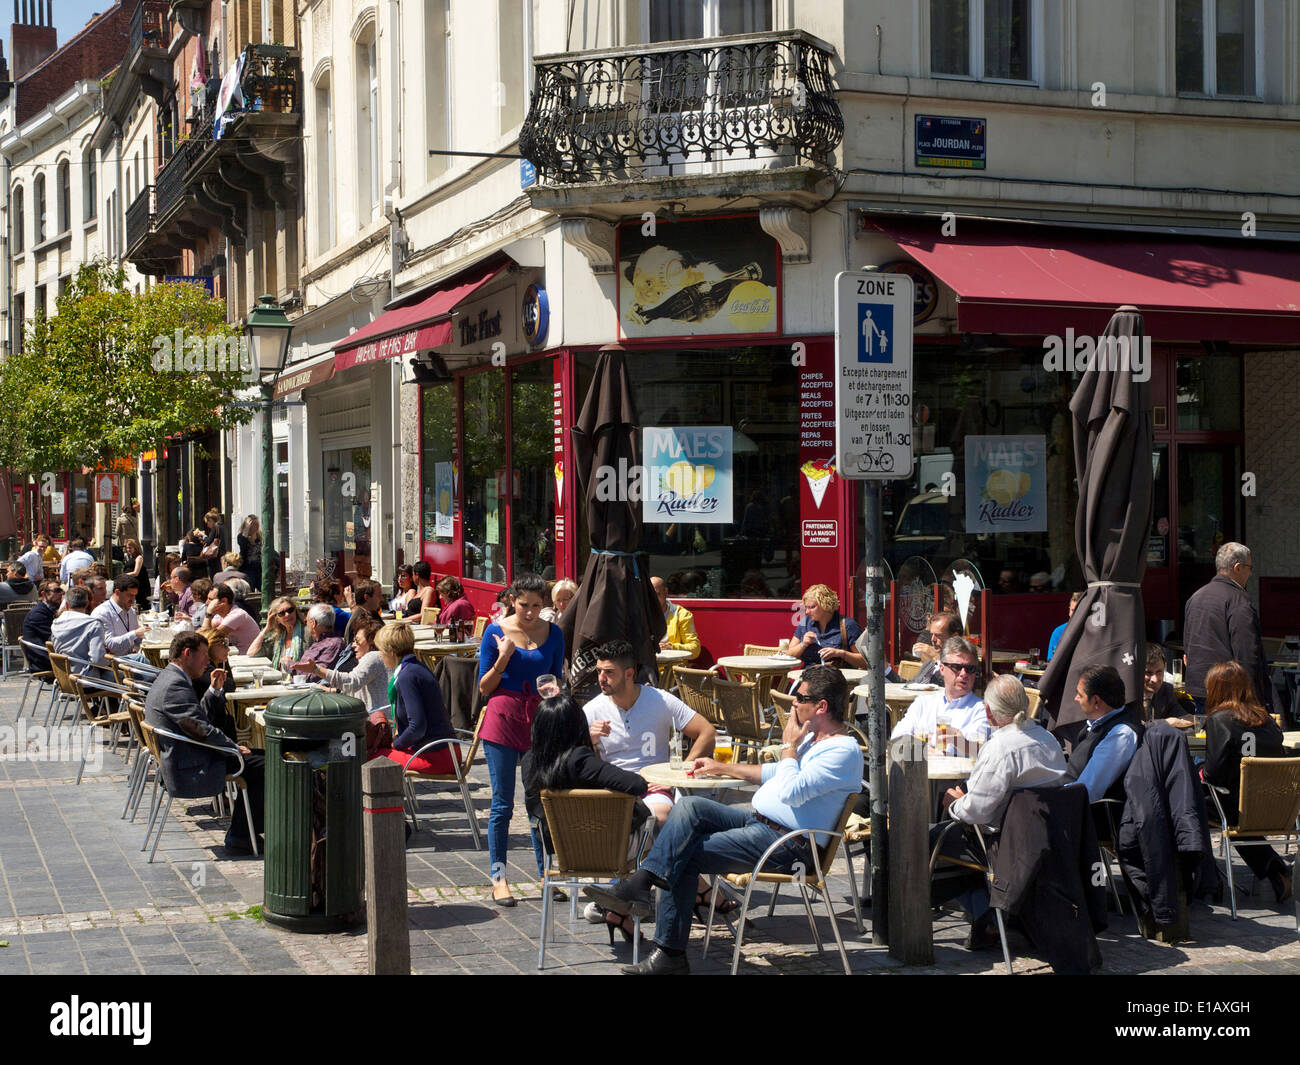 People sitting in the sun at a streetcorner cafe on Jourdan square in the EU district of Brussels, Belgium Stock Photo